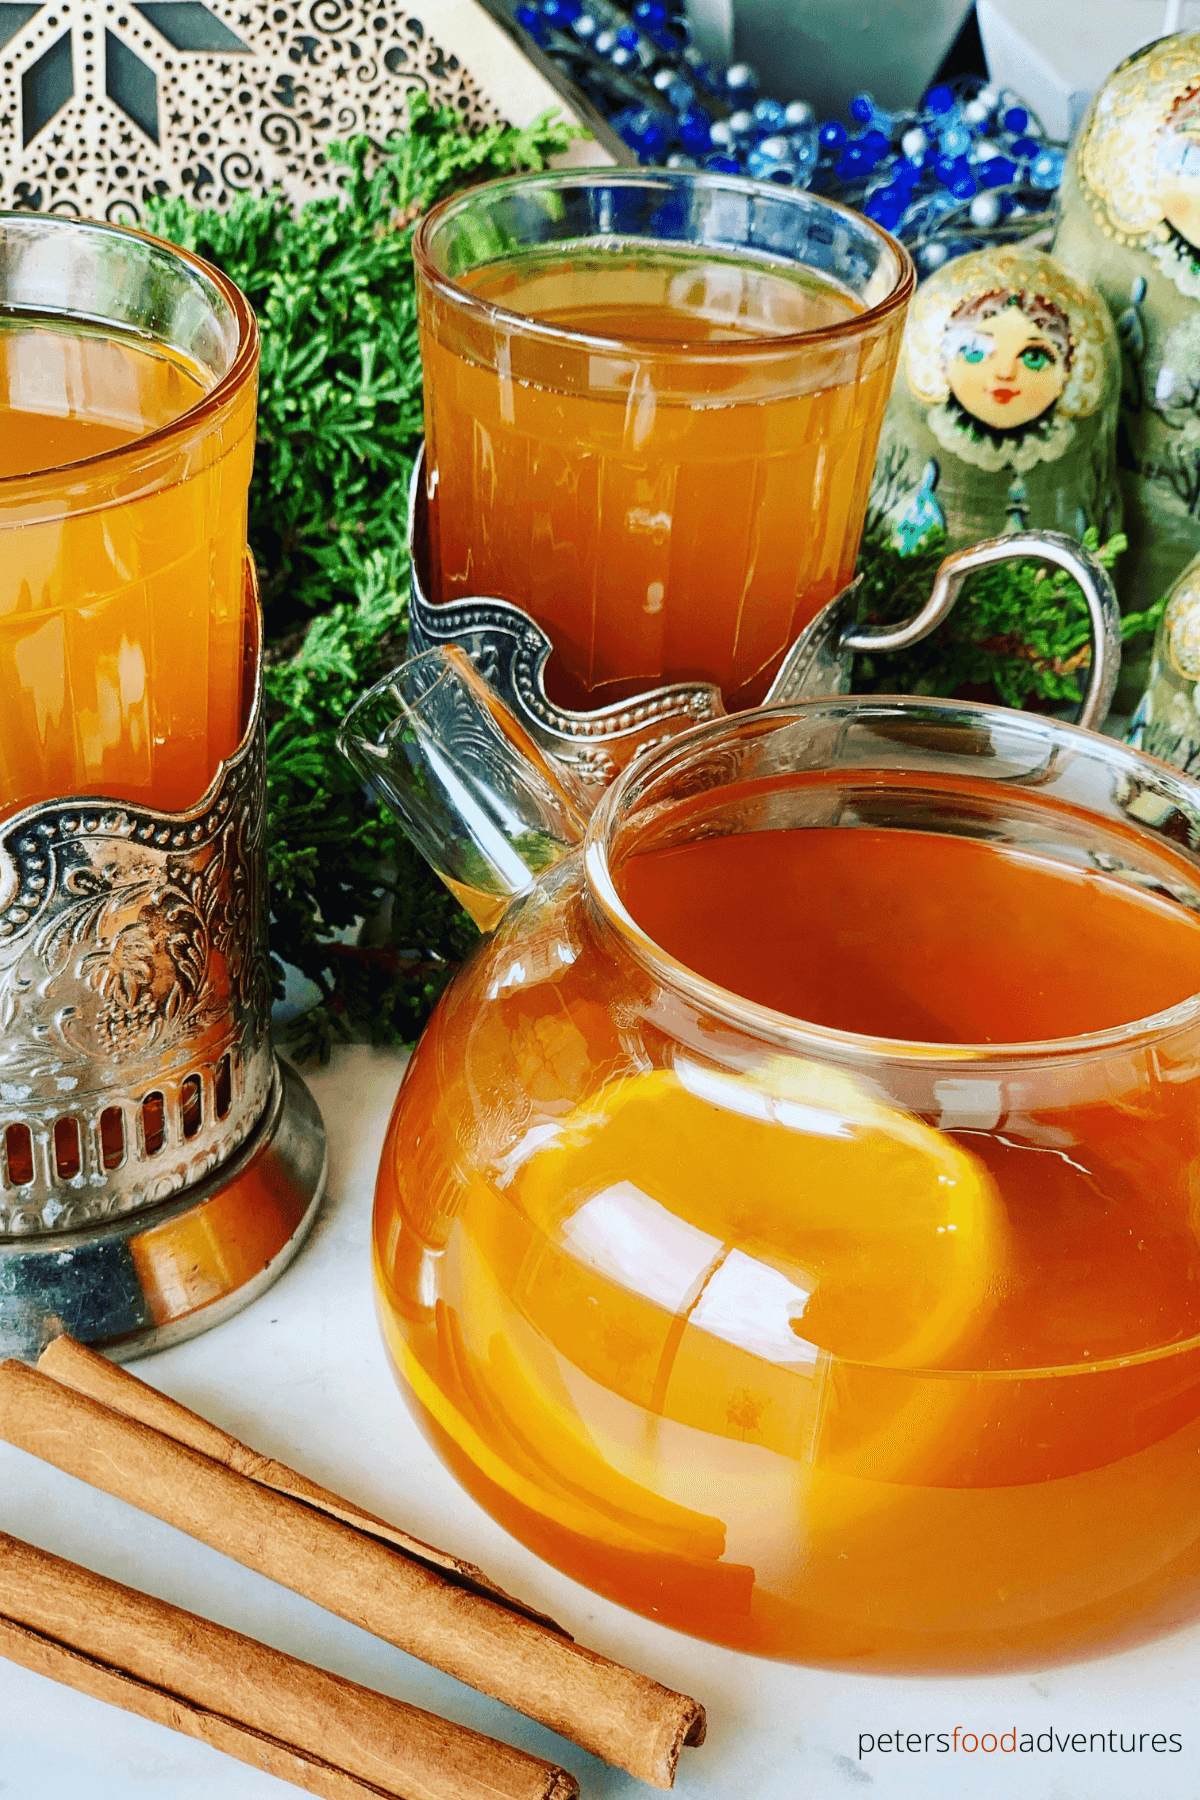 russian tea naturally steeped in a pot